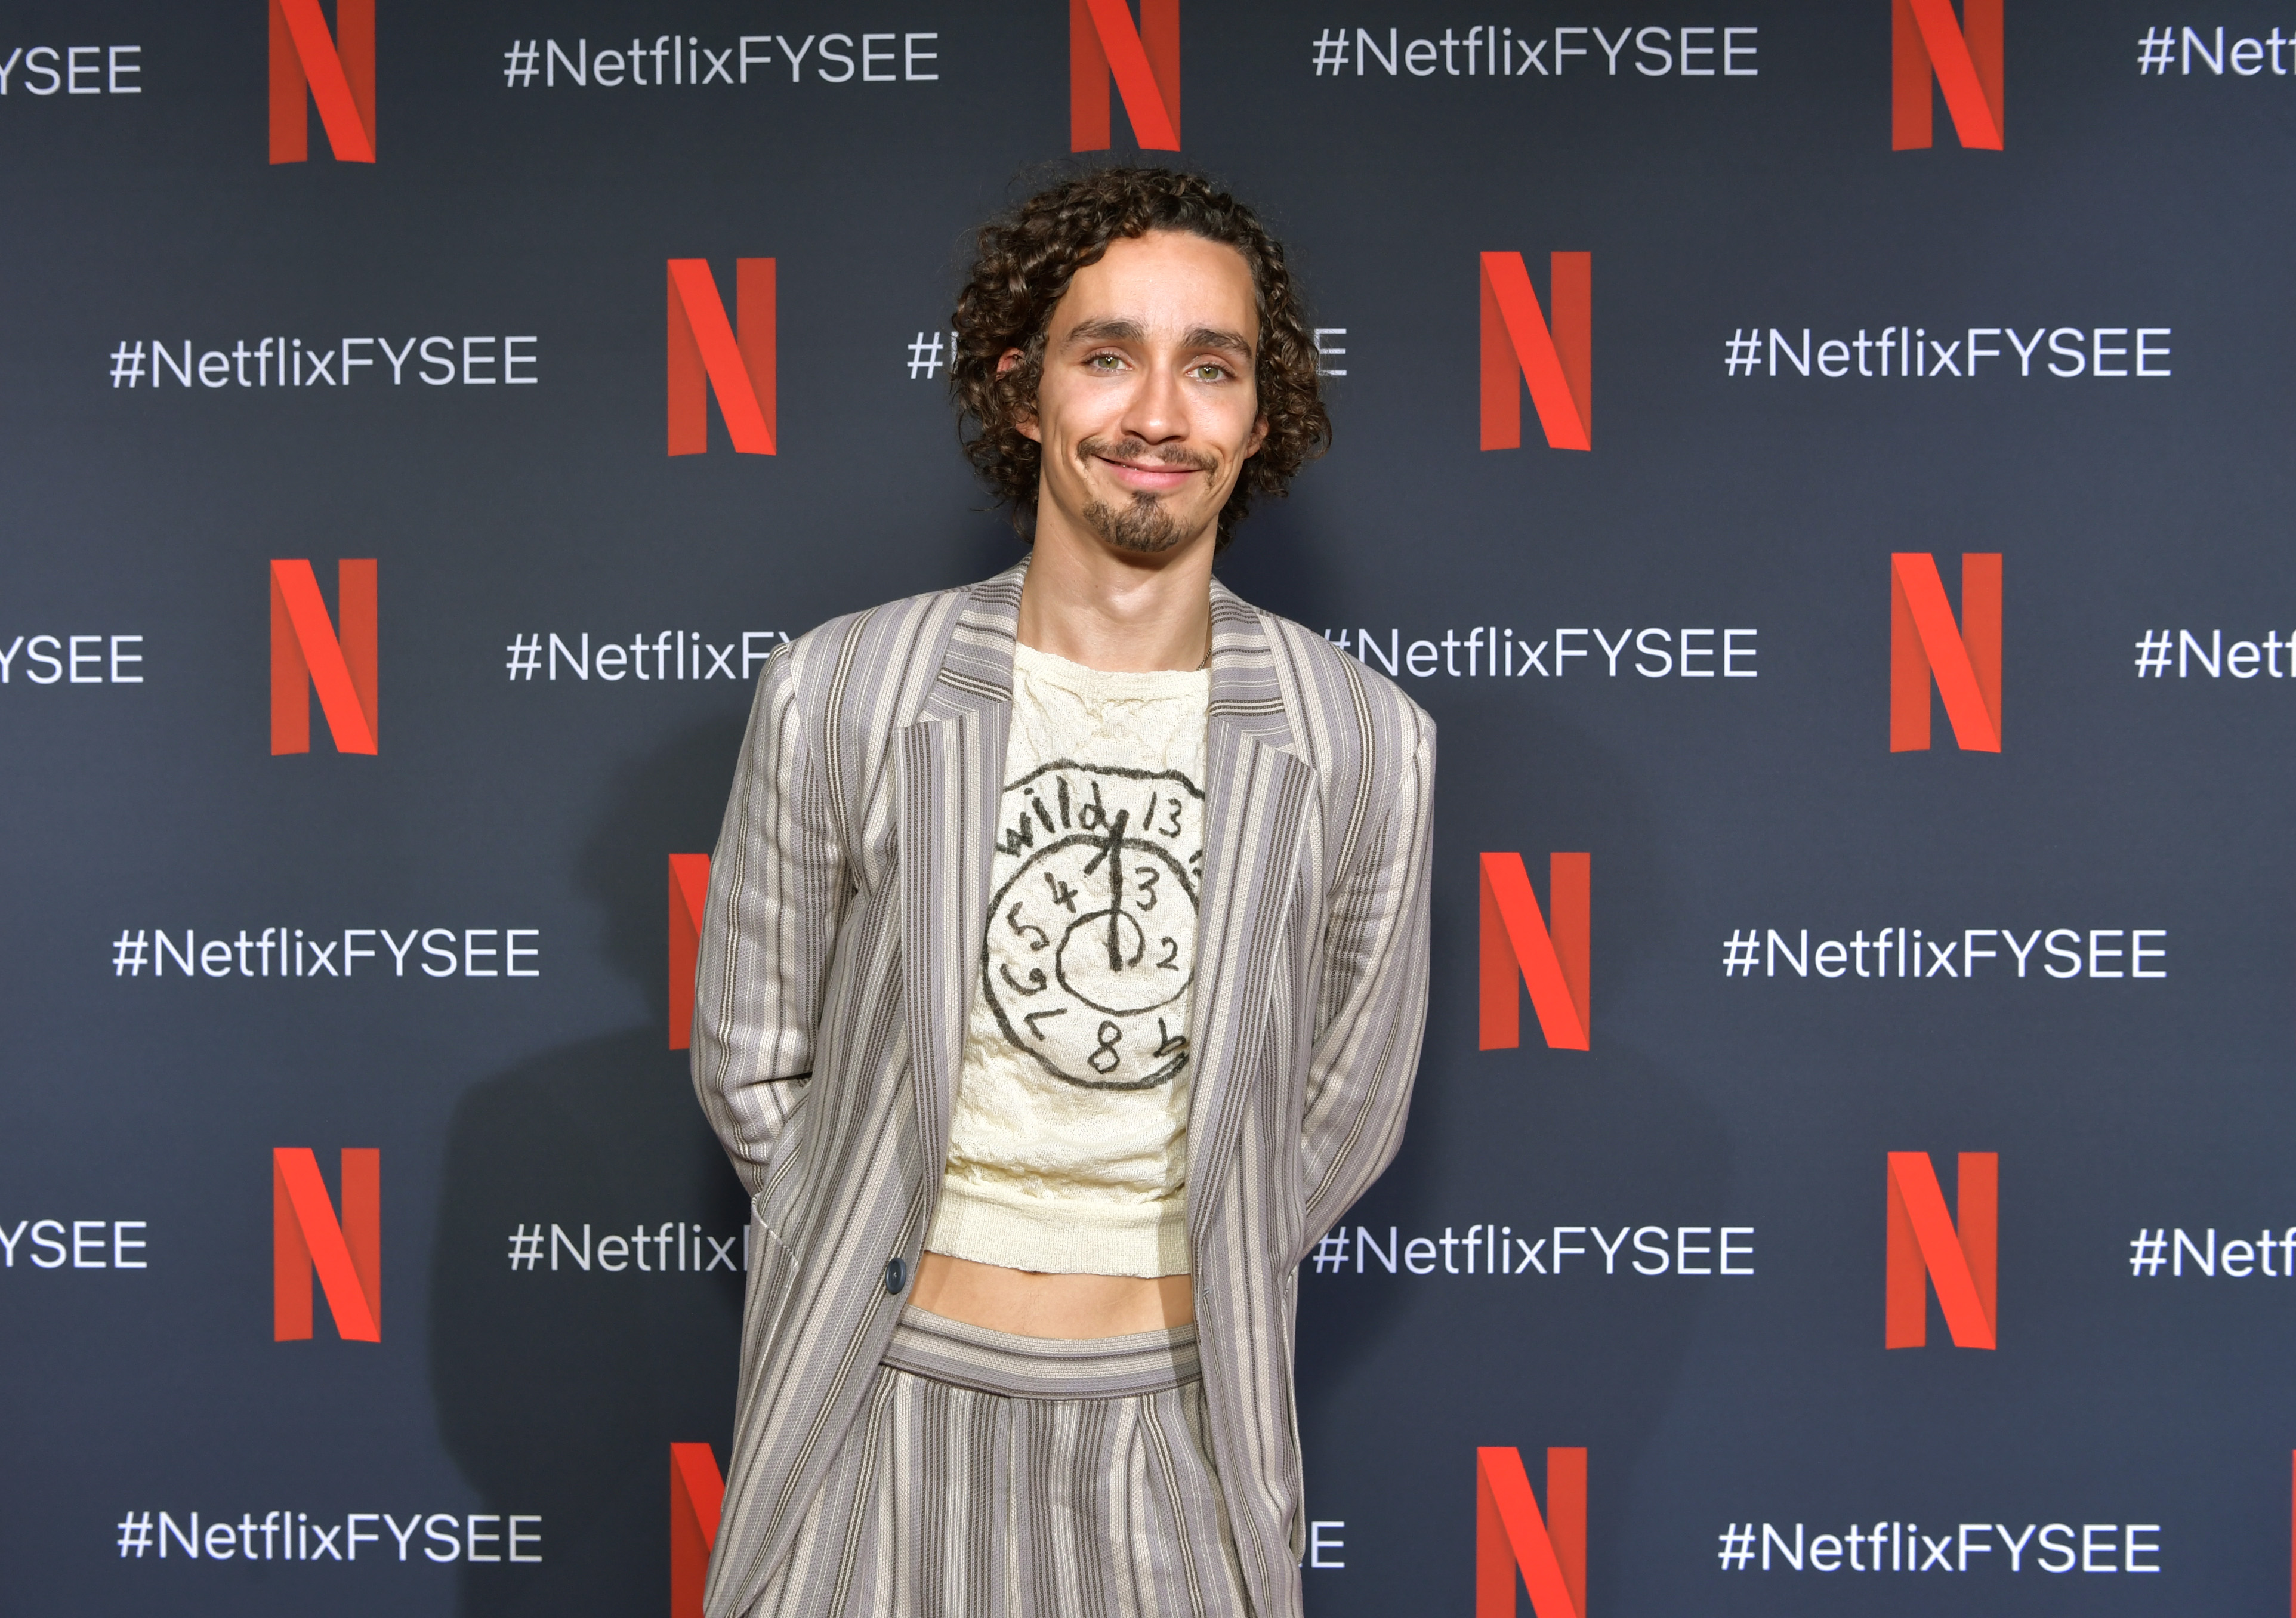 ‘The Umbrella Academy’: Robert Sheehan Was Upset With His Portrayal of Klaus in Season 2, ‘Beat Himself up’ While Filming